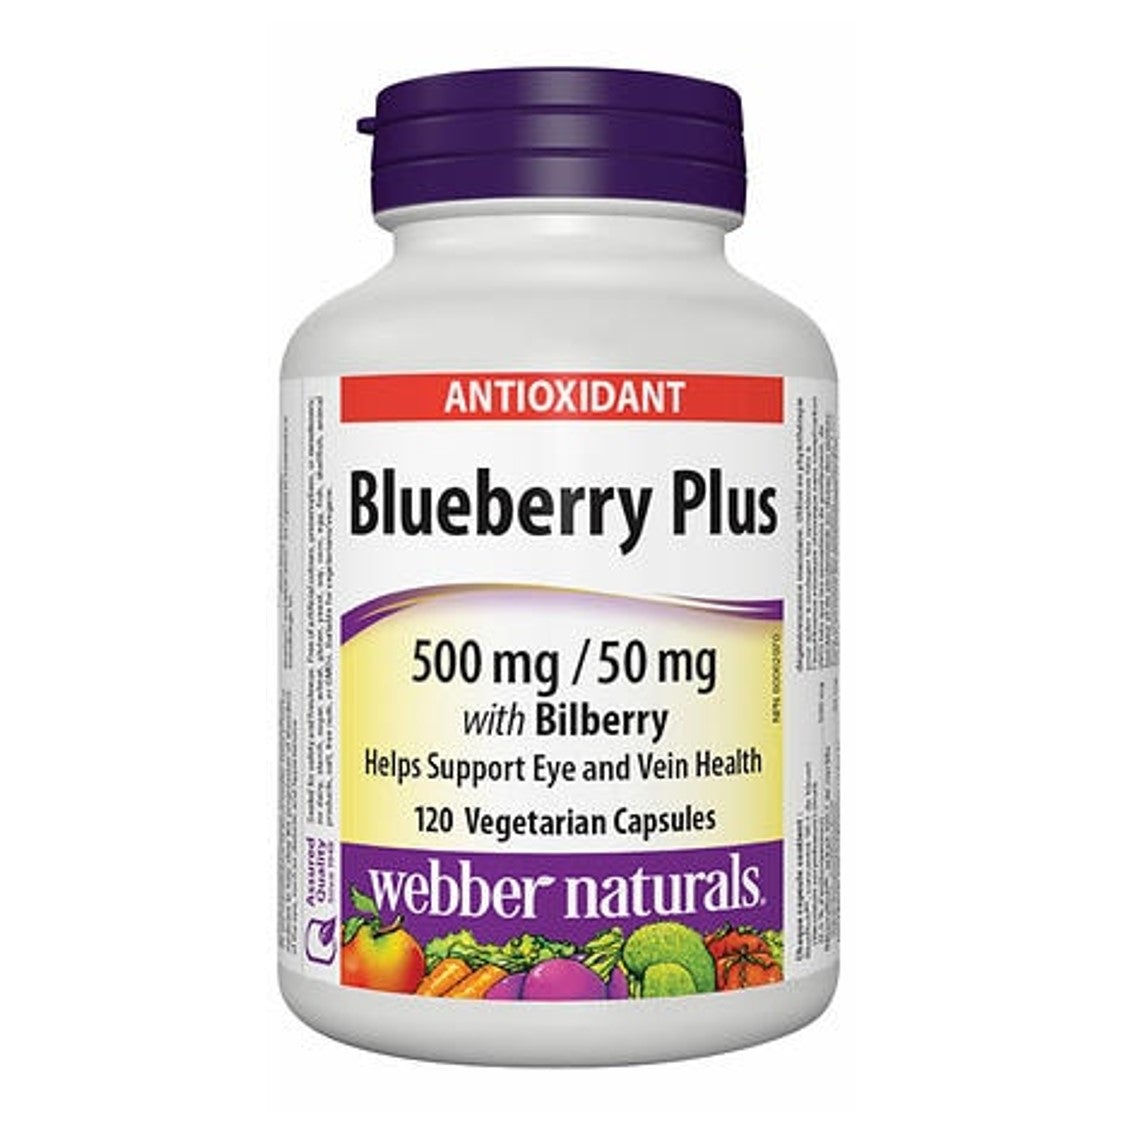 webber-naturals-blueberry-plus-with-bilberry-500mg-50mg-120vcapsules